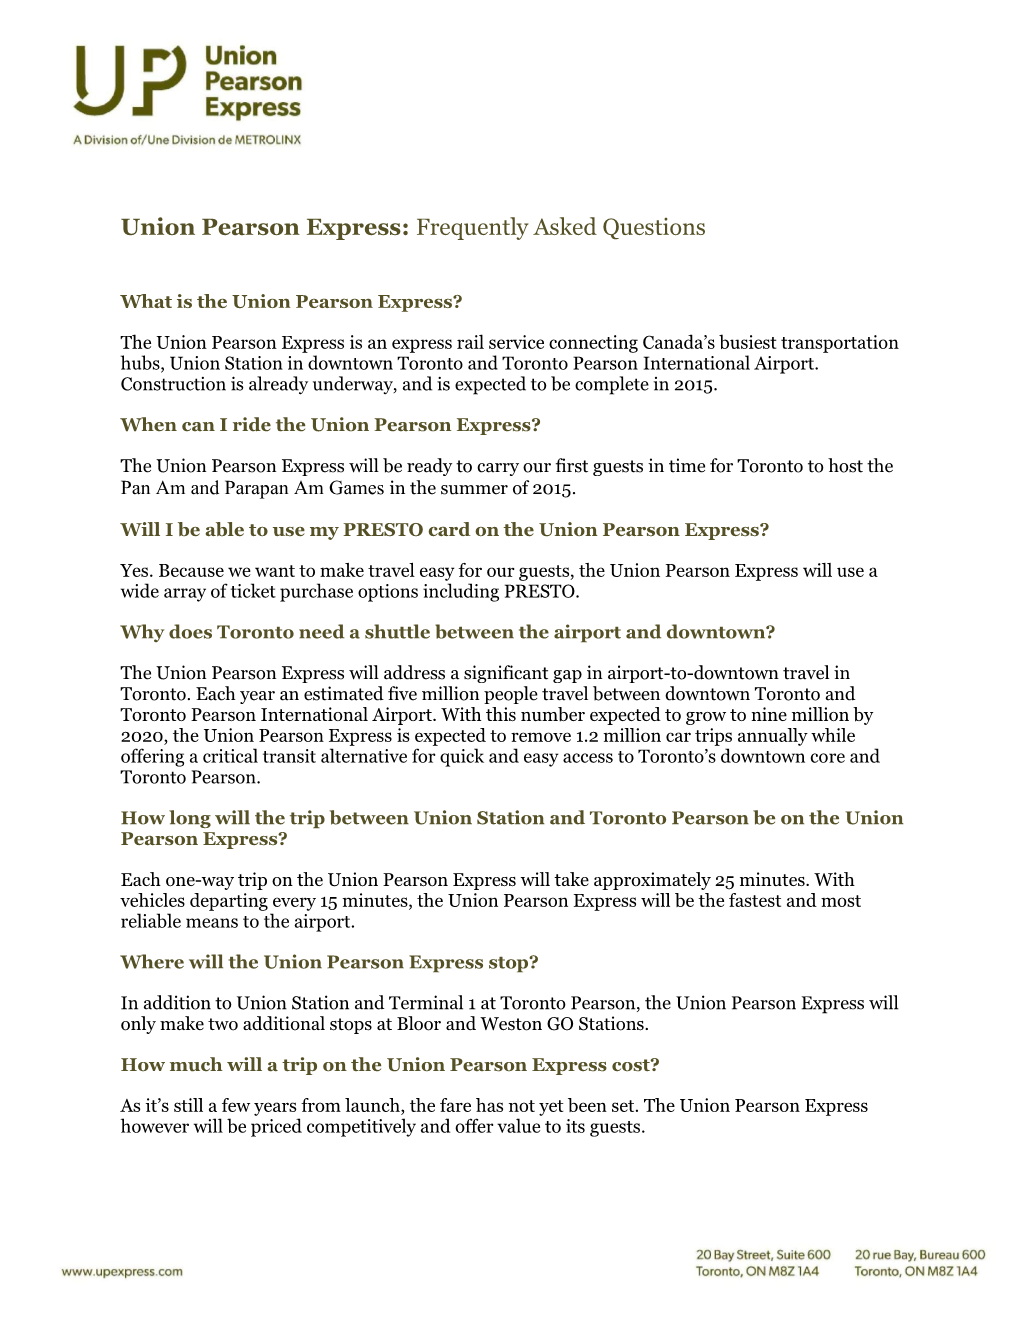 Union Pearson Express: Frequently Asked Questions